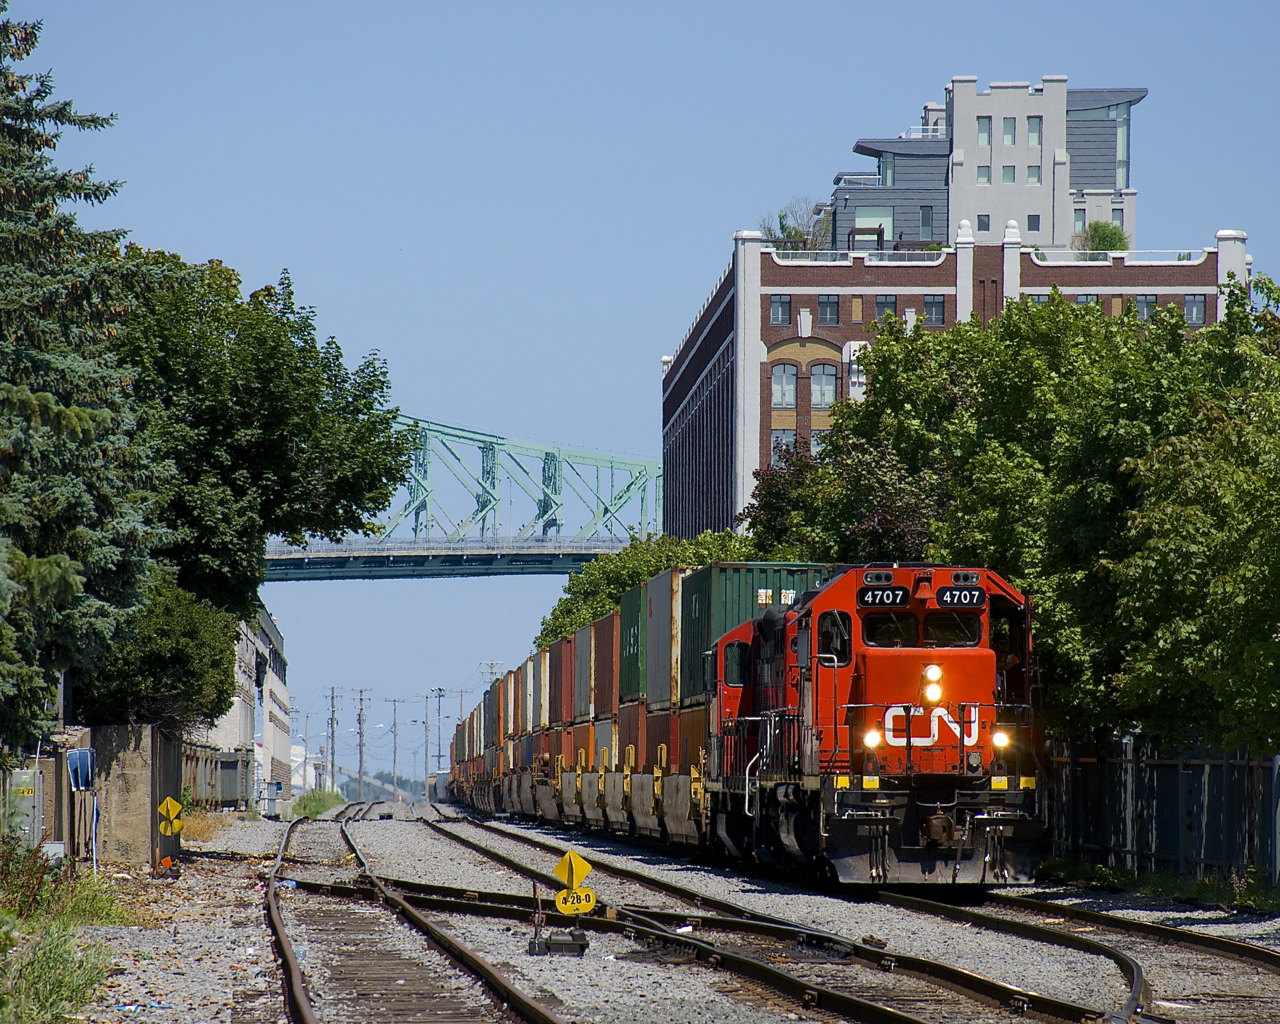 The Pointe St-Charles Switcher is getting ready to leave the Port of Montreal with GP38-2 CN 4707 & GP9 CN 7054 for power and a train consisting almost entirely of intermodal traffic.